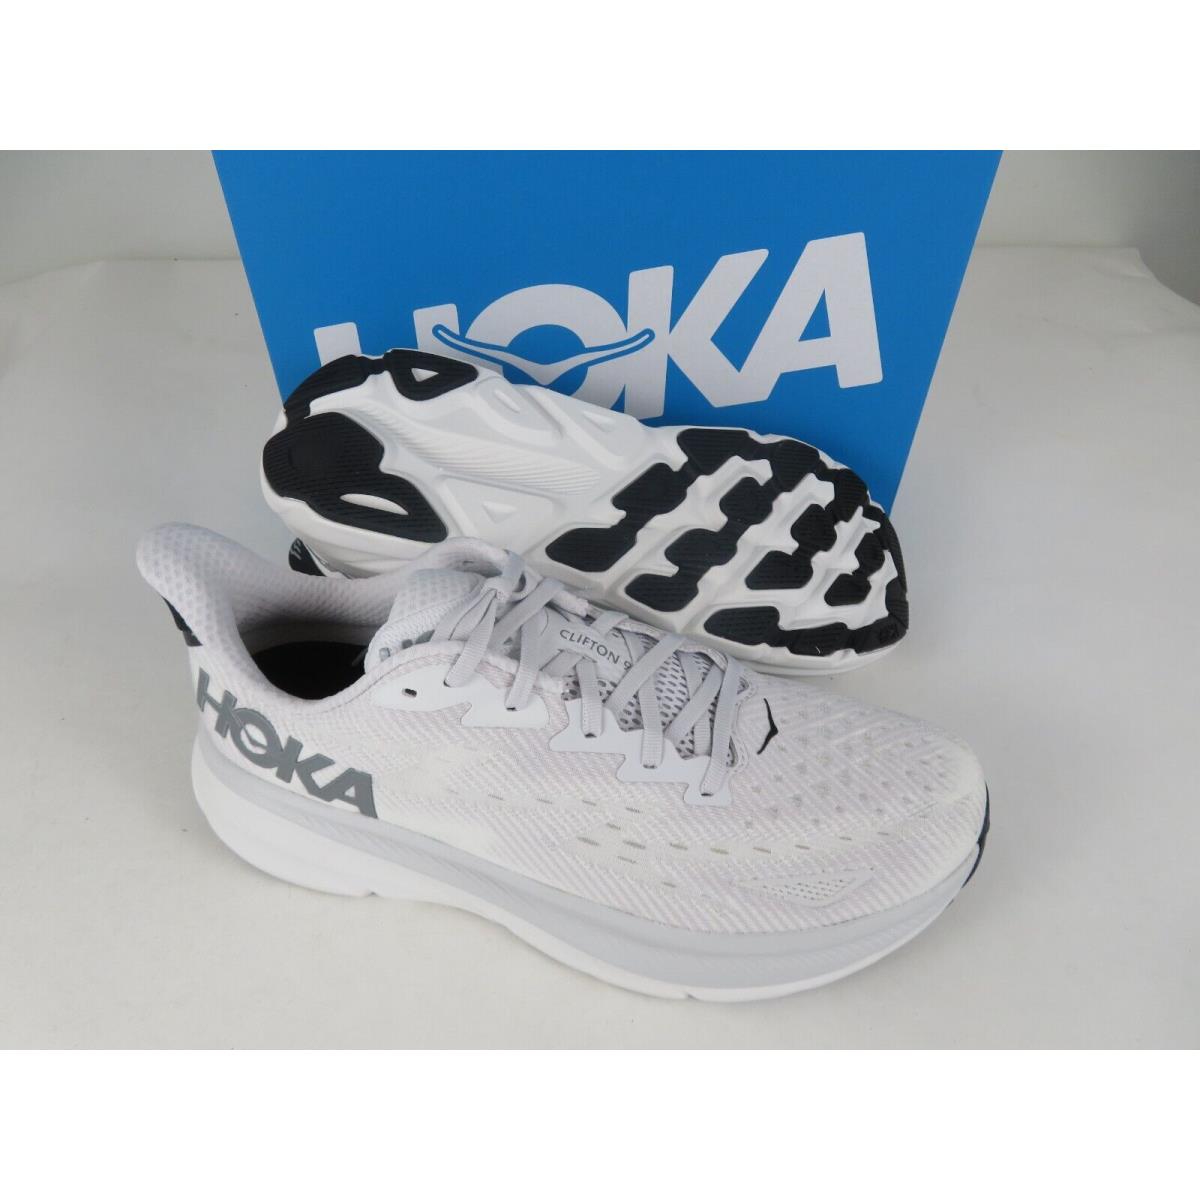 Hoka One One Clifton 9 Mens 11 D Shoes Gray Running Sneaker Gym 1127895 Ncsw